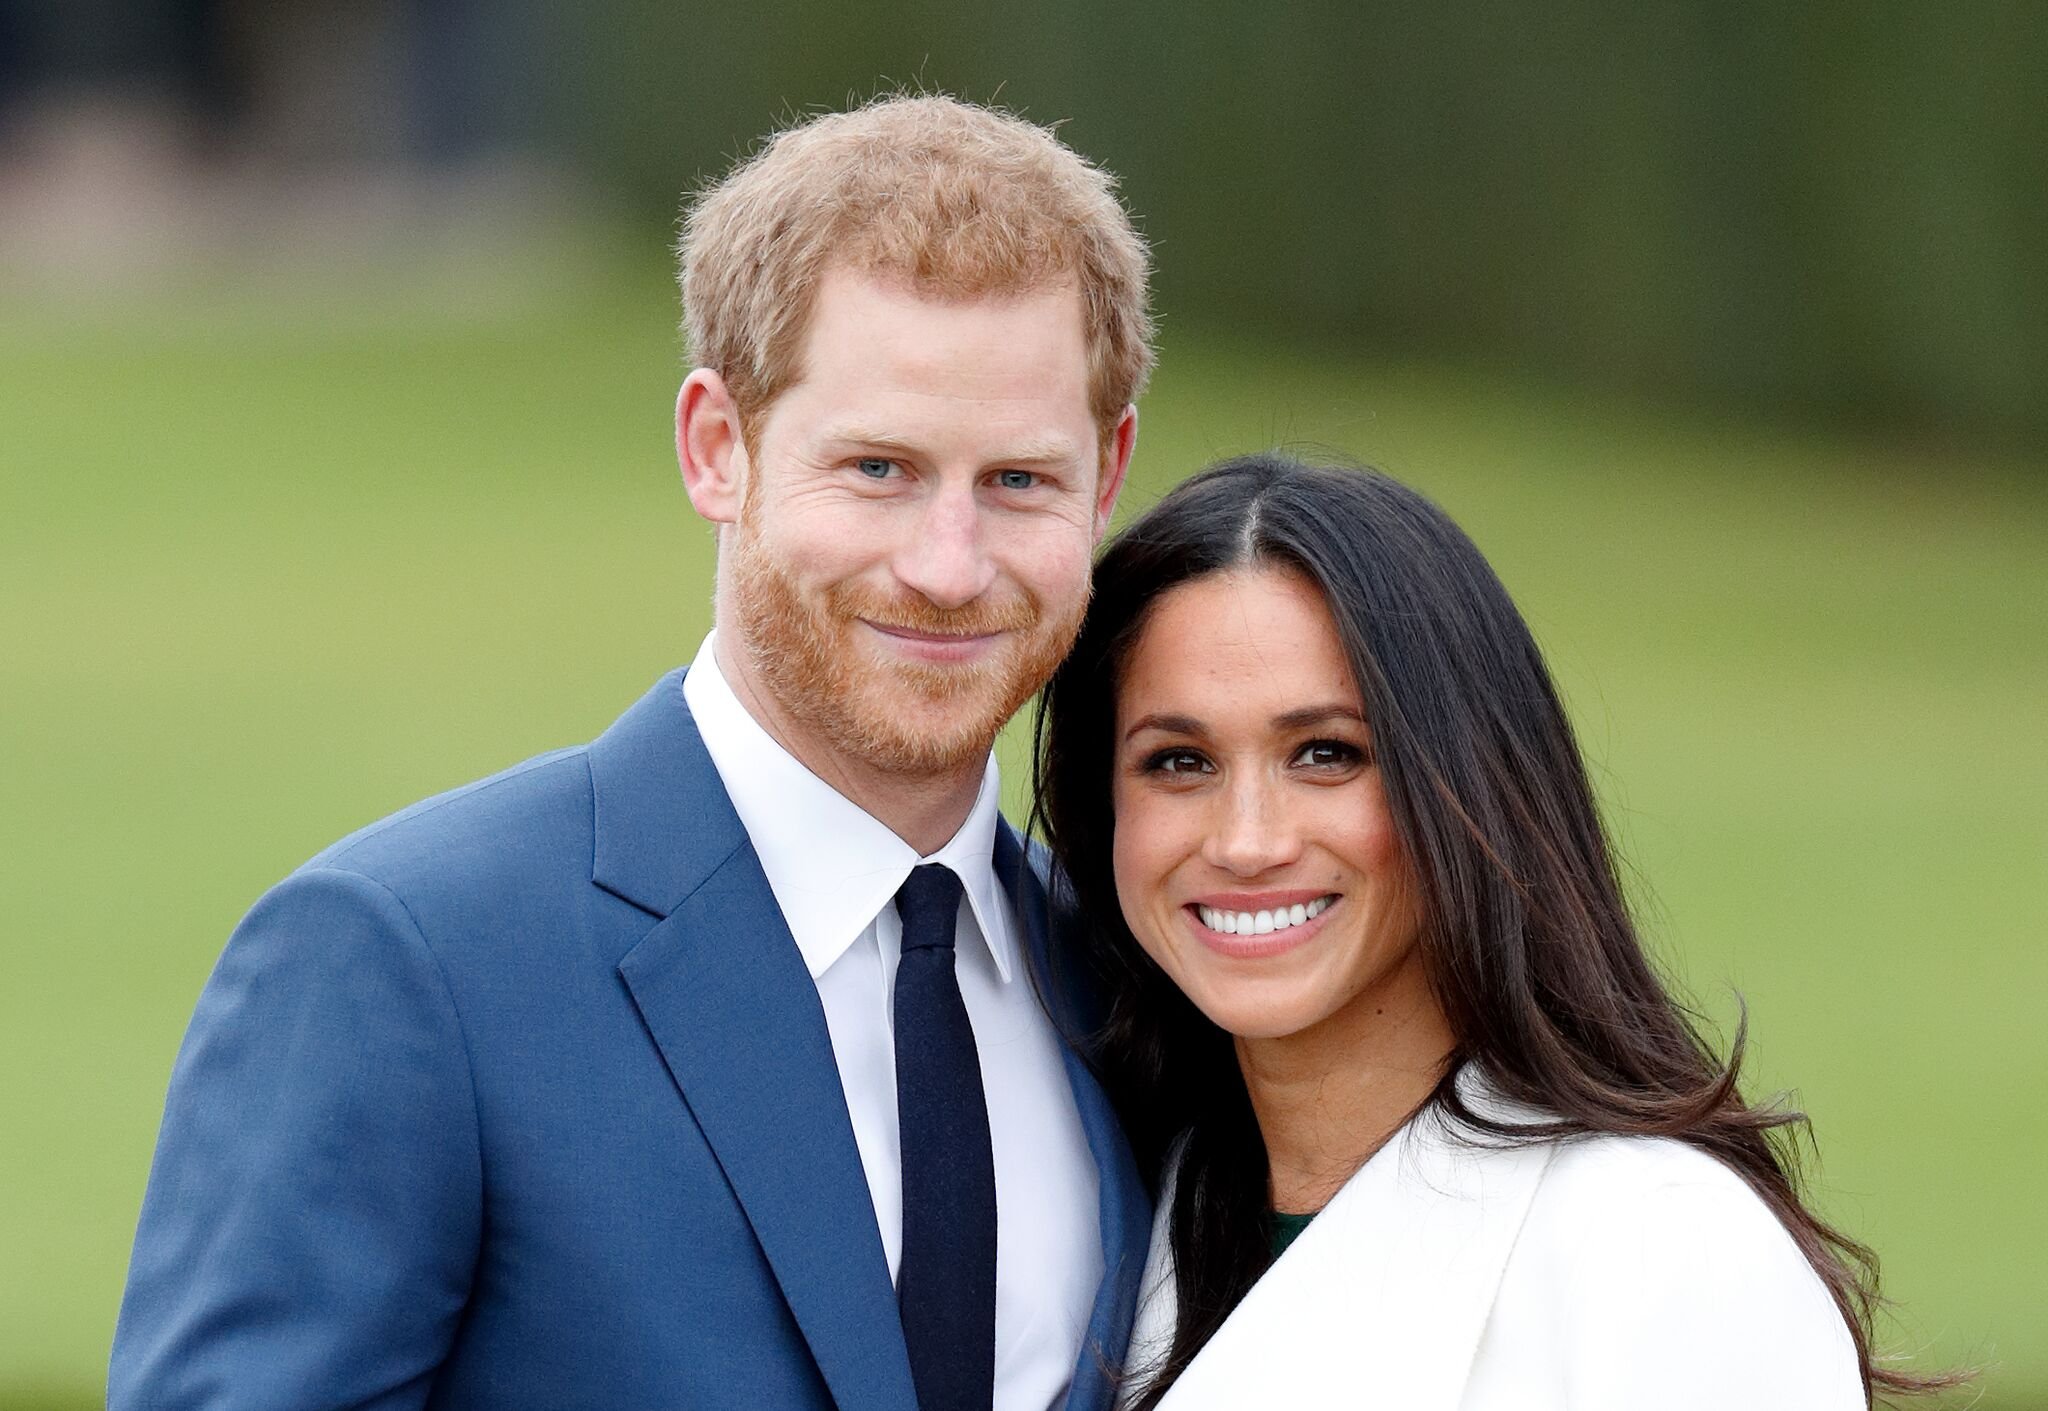 Prince Harry and Meghan Markle attend an official photocall to announce their engagement at The Sunken Gardens, Kensington Palace on November 27, 2017 | Photo: Getty Images